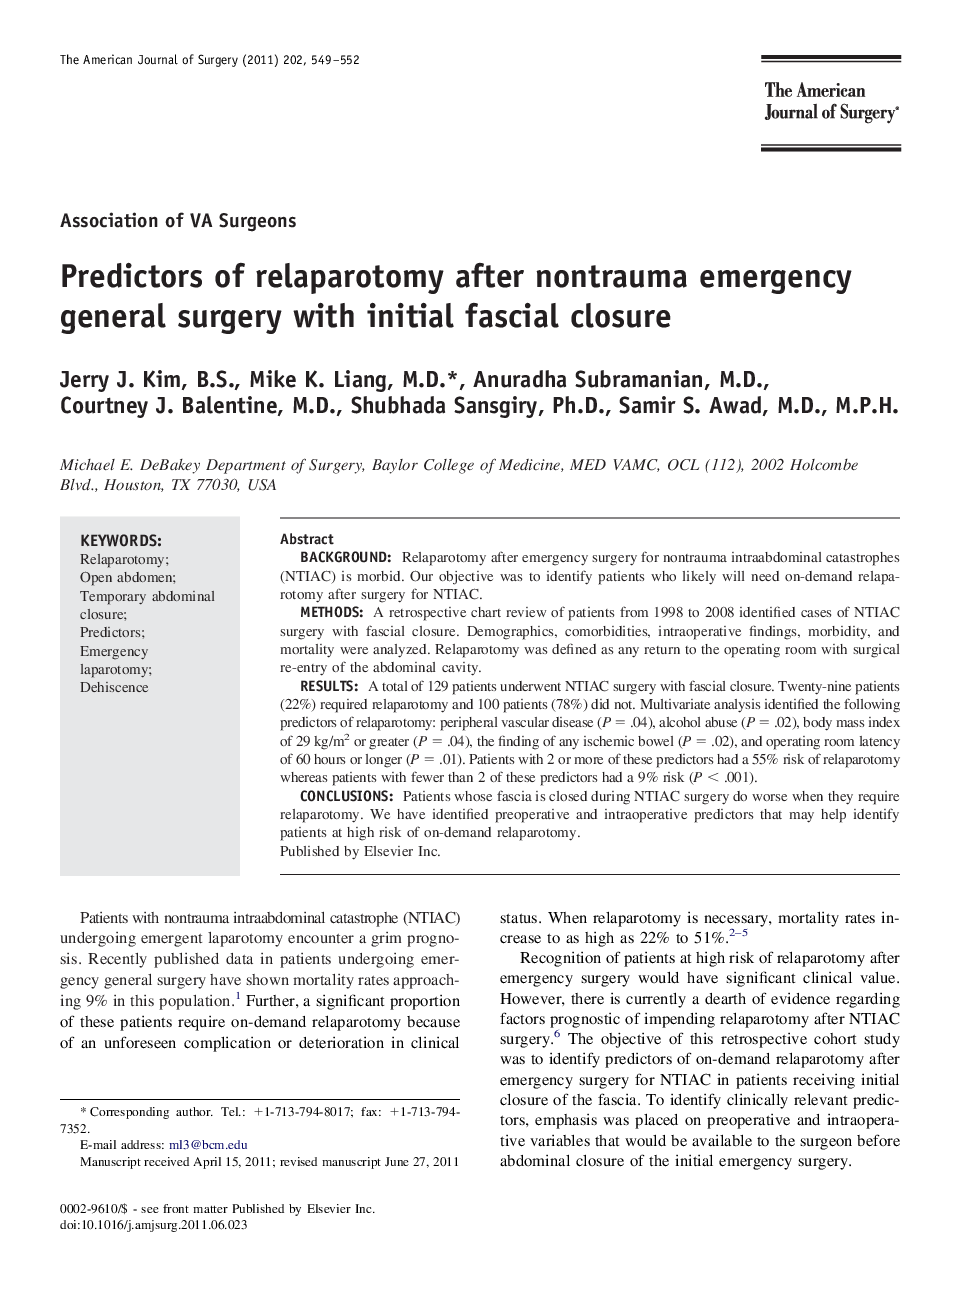 Predictors of relaparotomy after nontrauma emergency general surgery with initial fascial closure